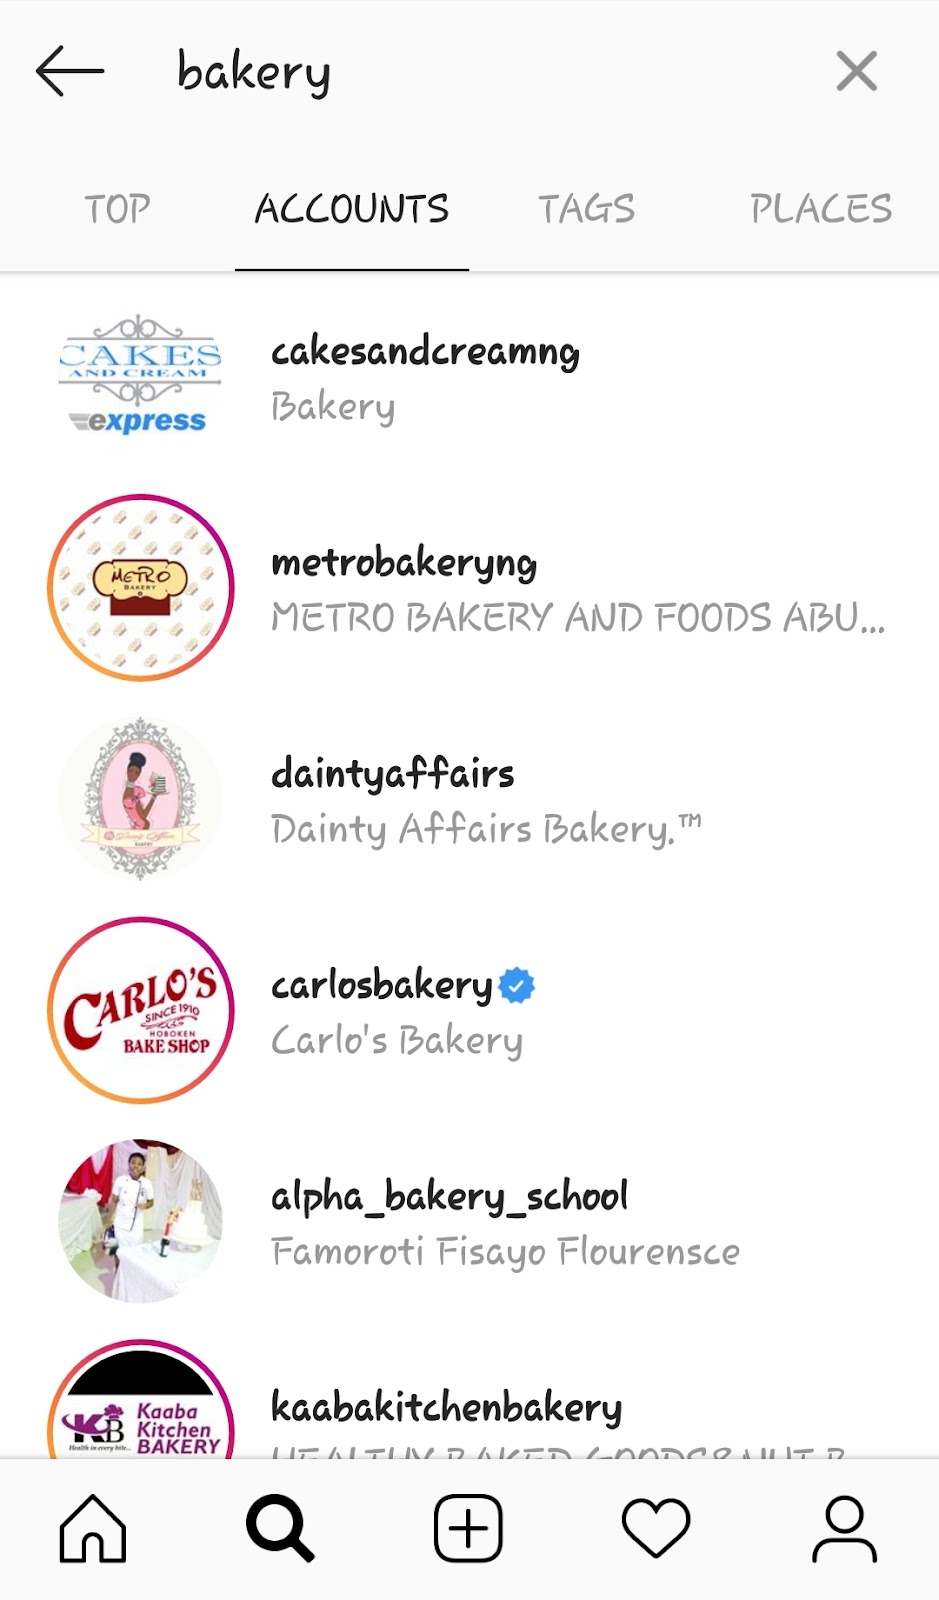 Instagram search results for bakery